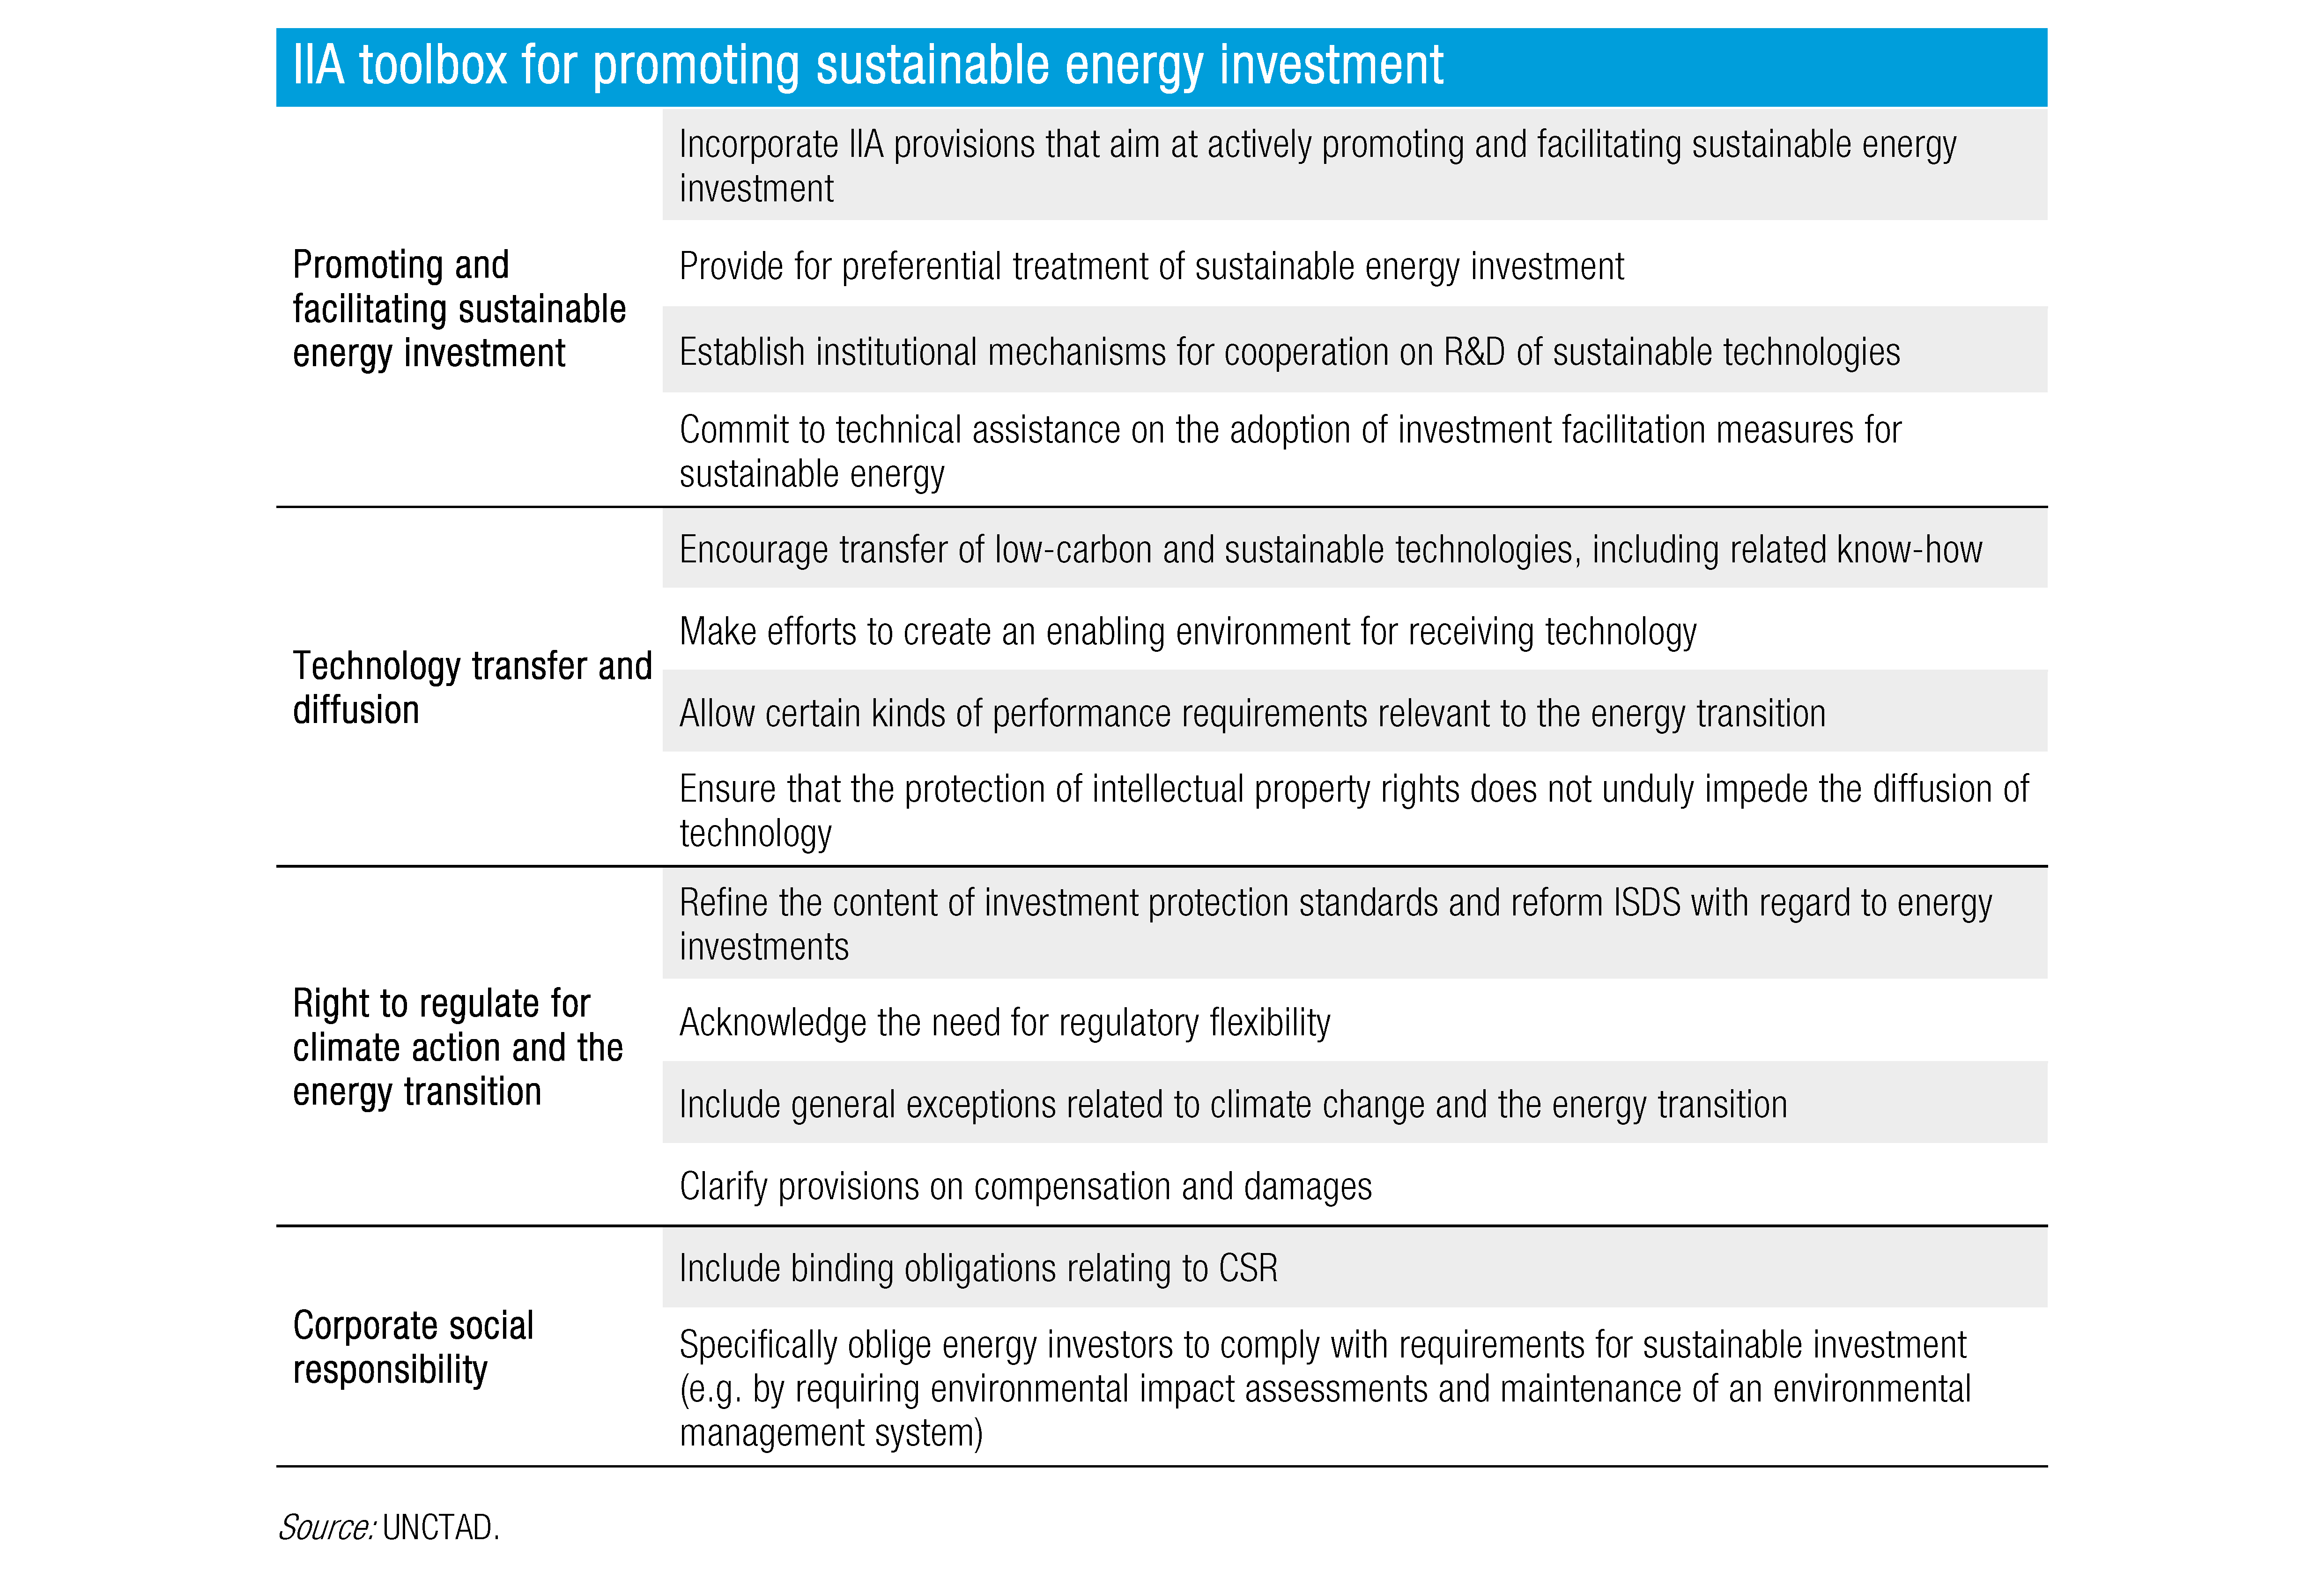 UNCTAD IIA reform toolbox for the energy transition